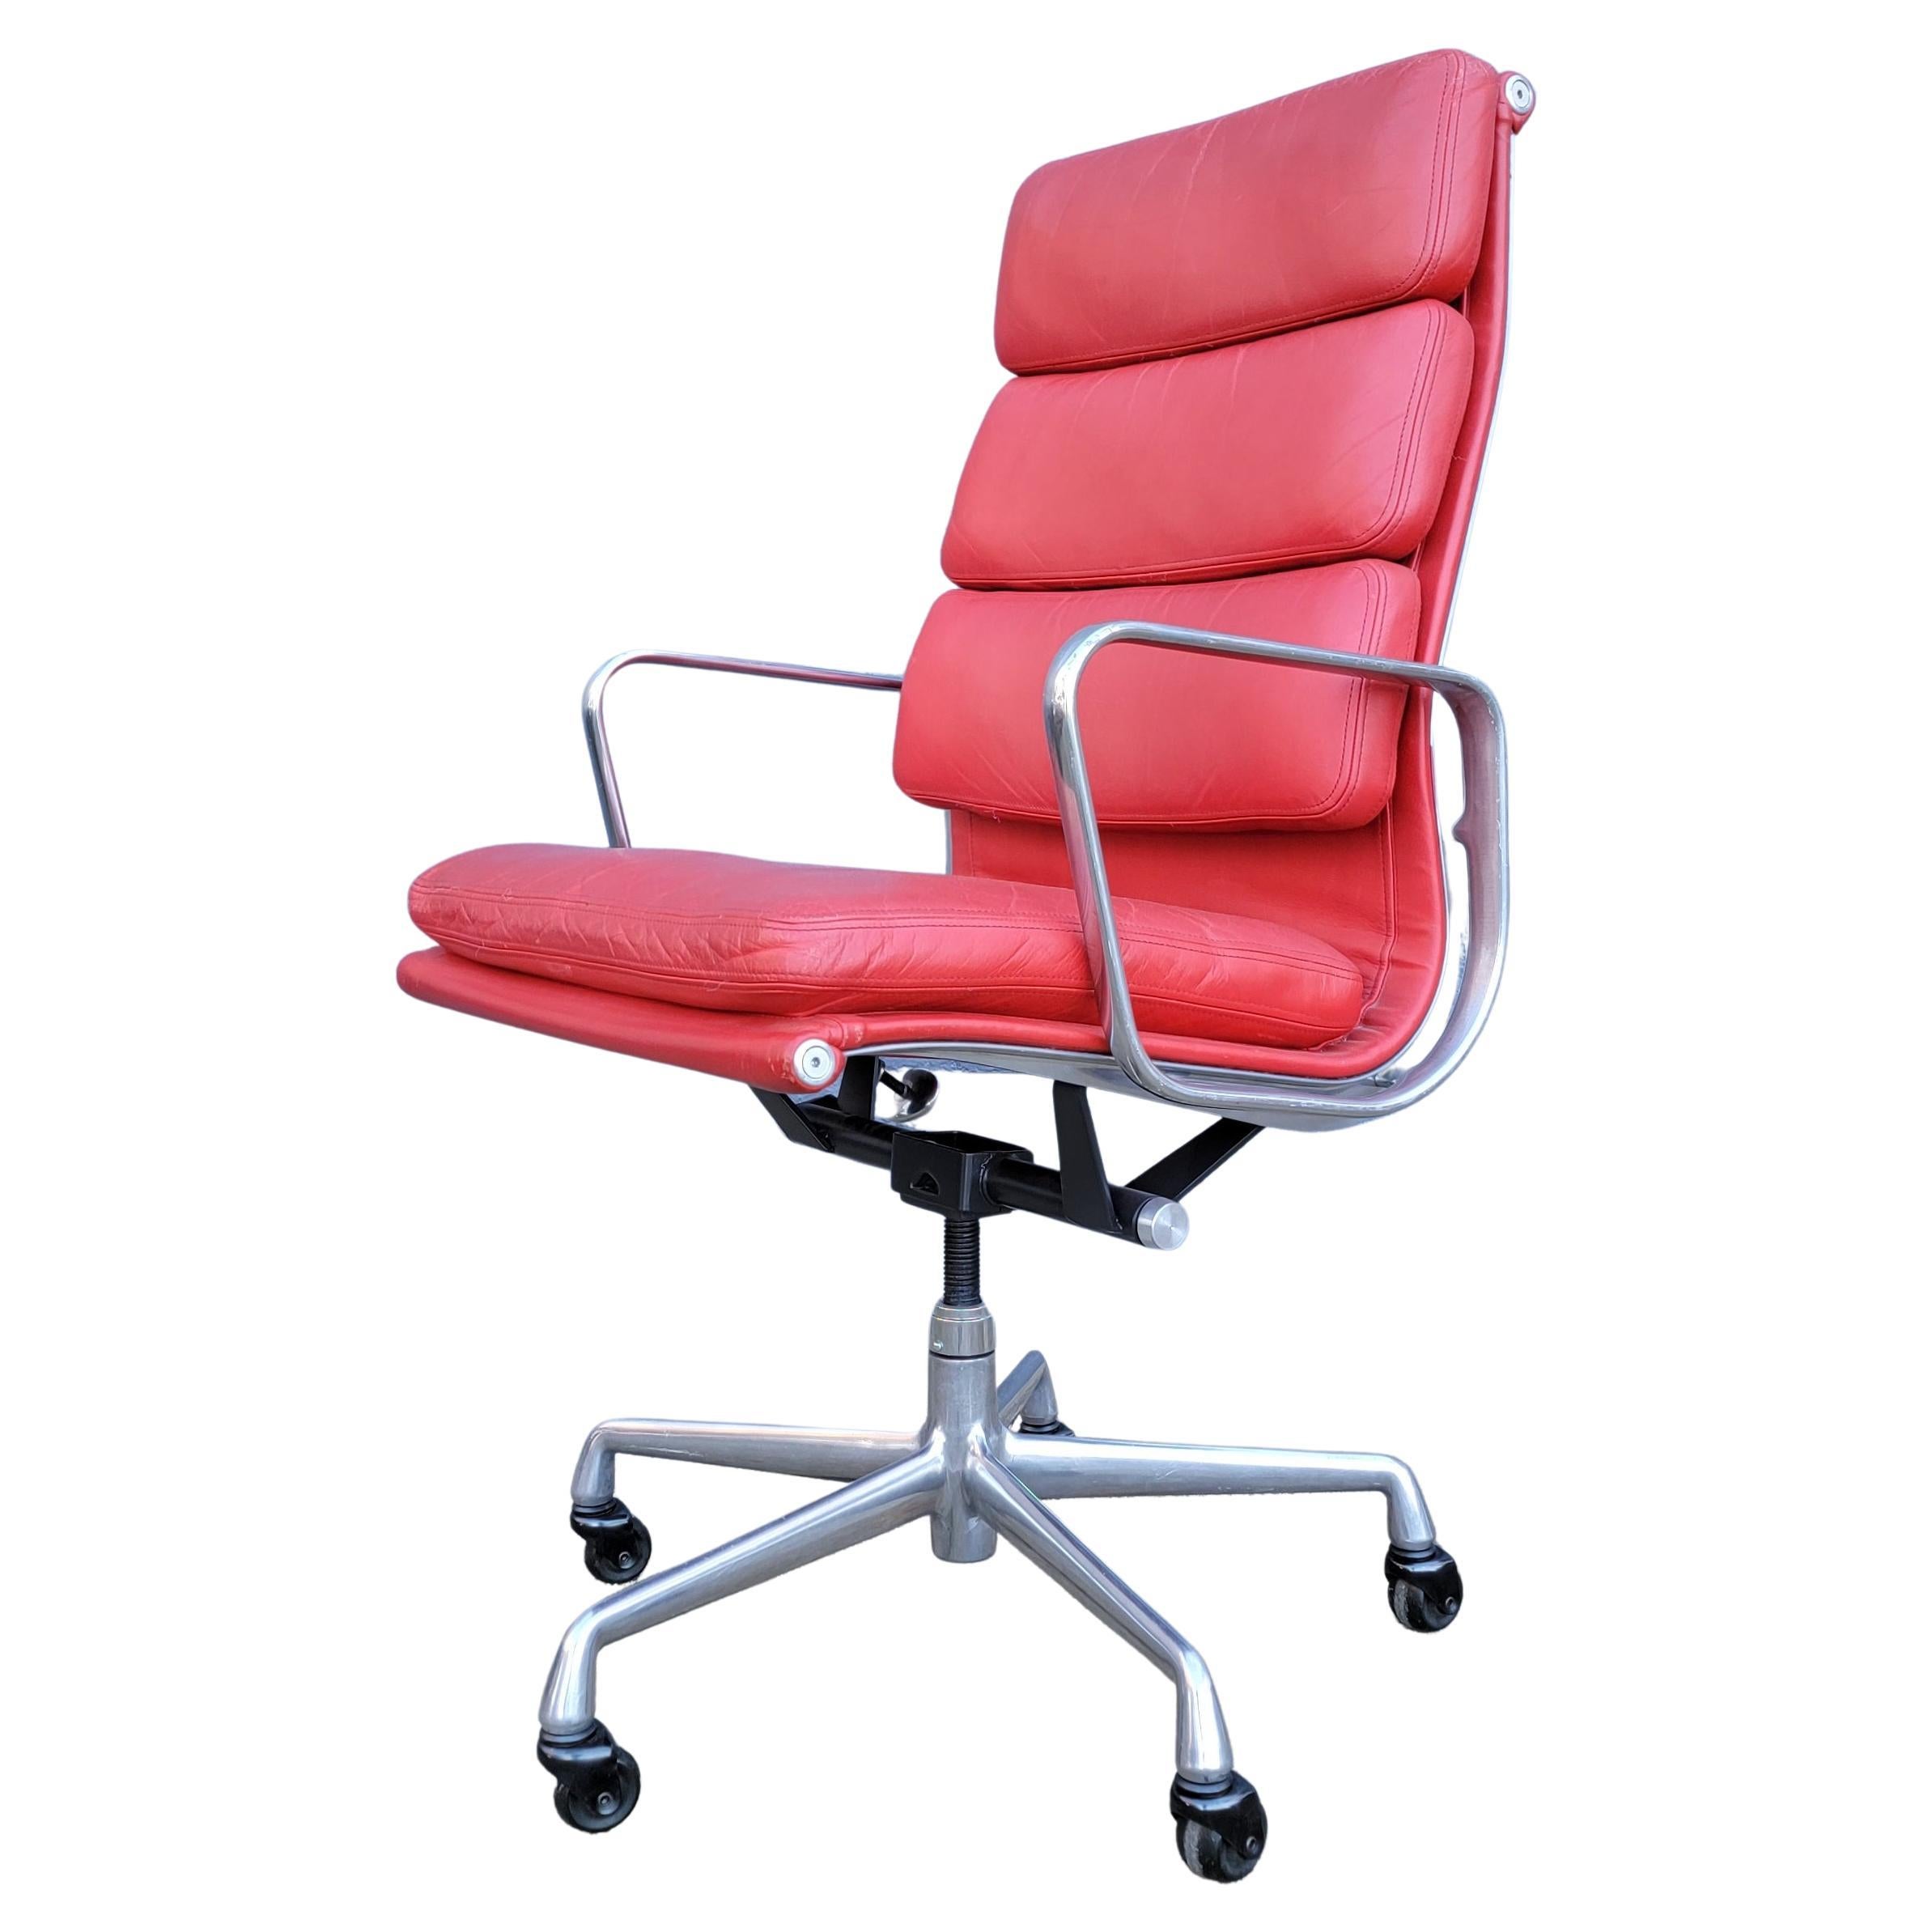 Eames Soft Pad Executive Chair Red Leather